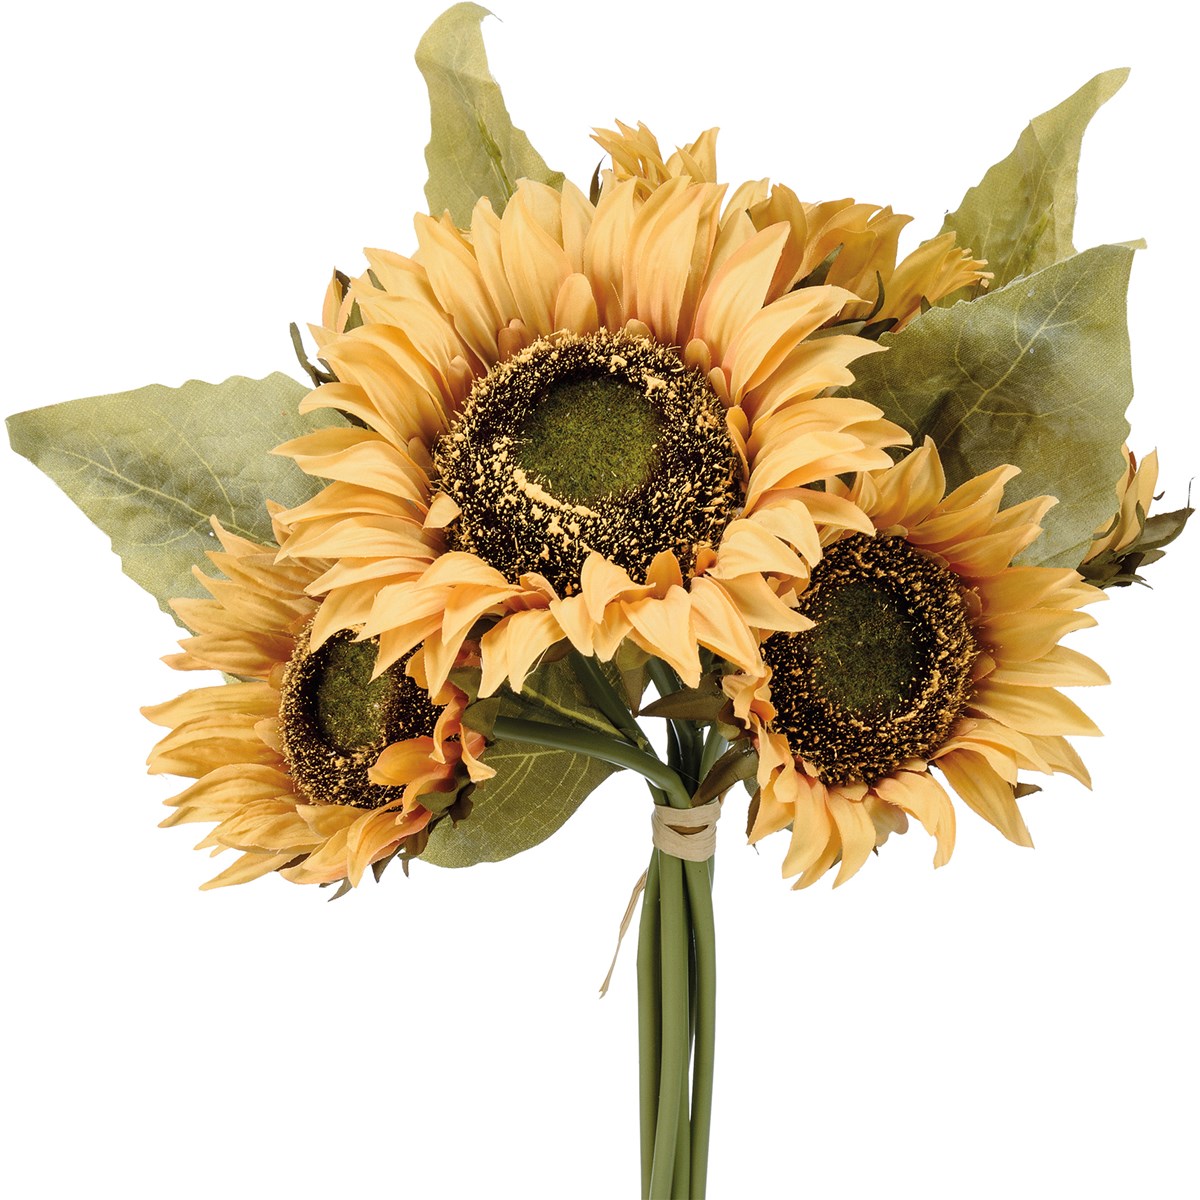 Bouquet - Lg Sunflowers - 13" Tall - Plastic, Wire, Fabric